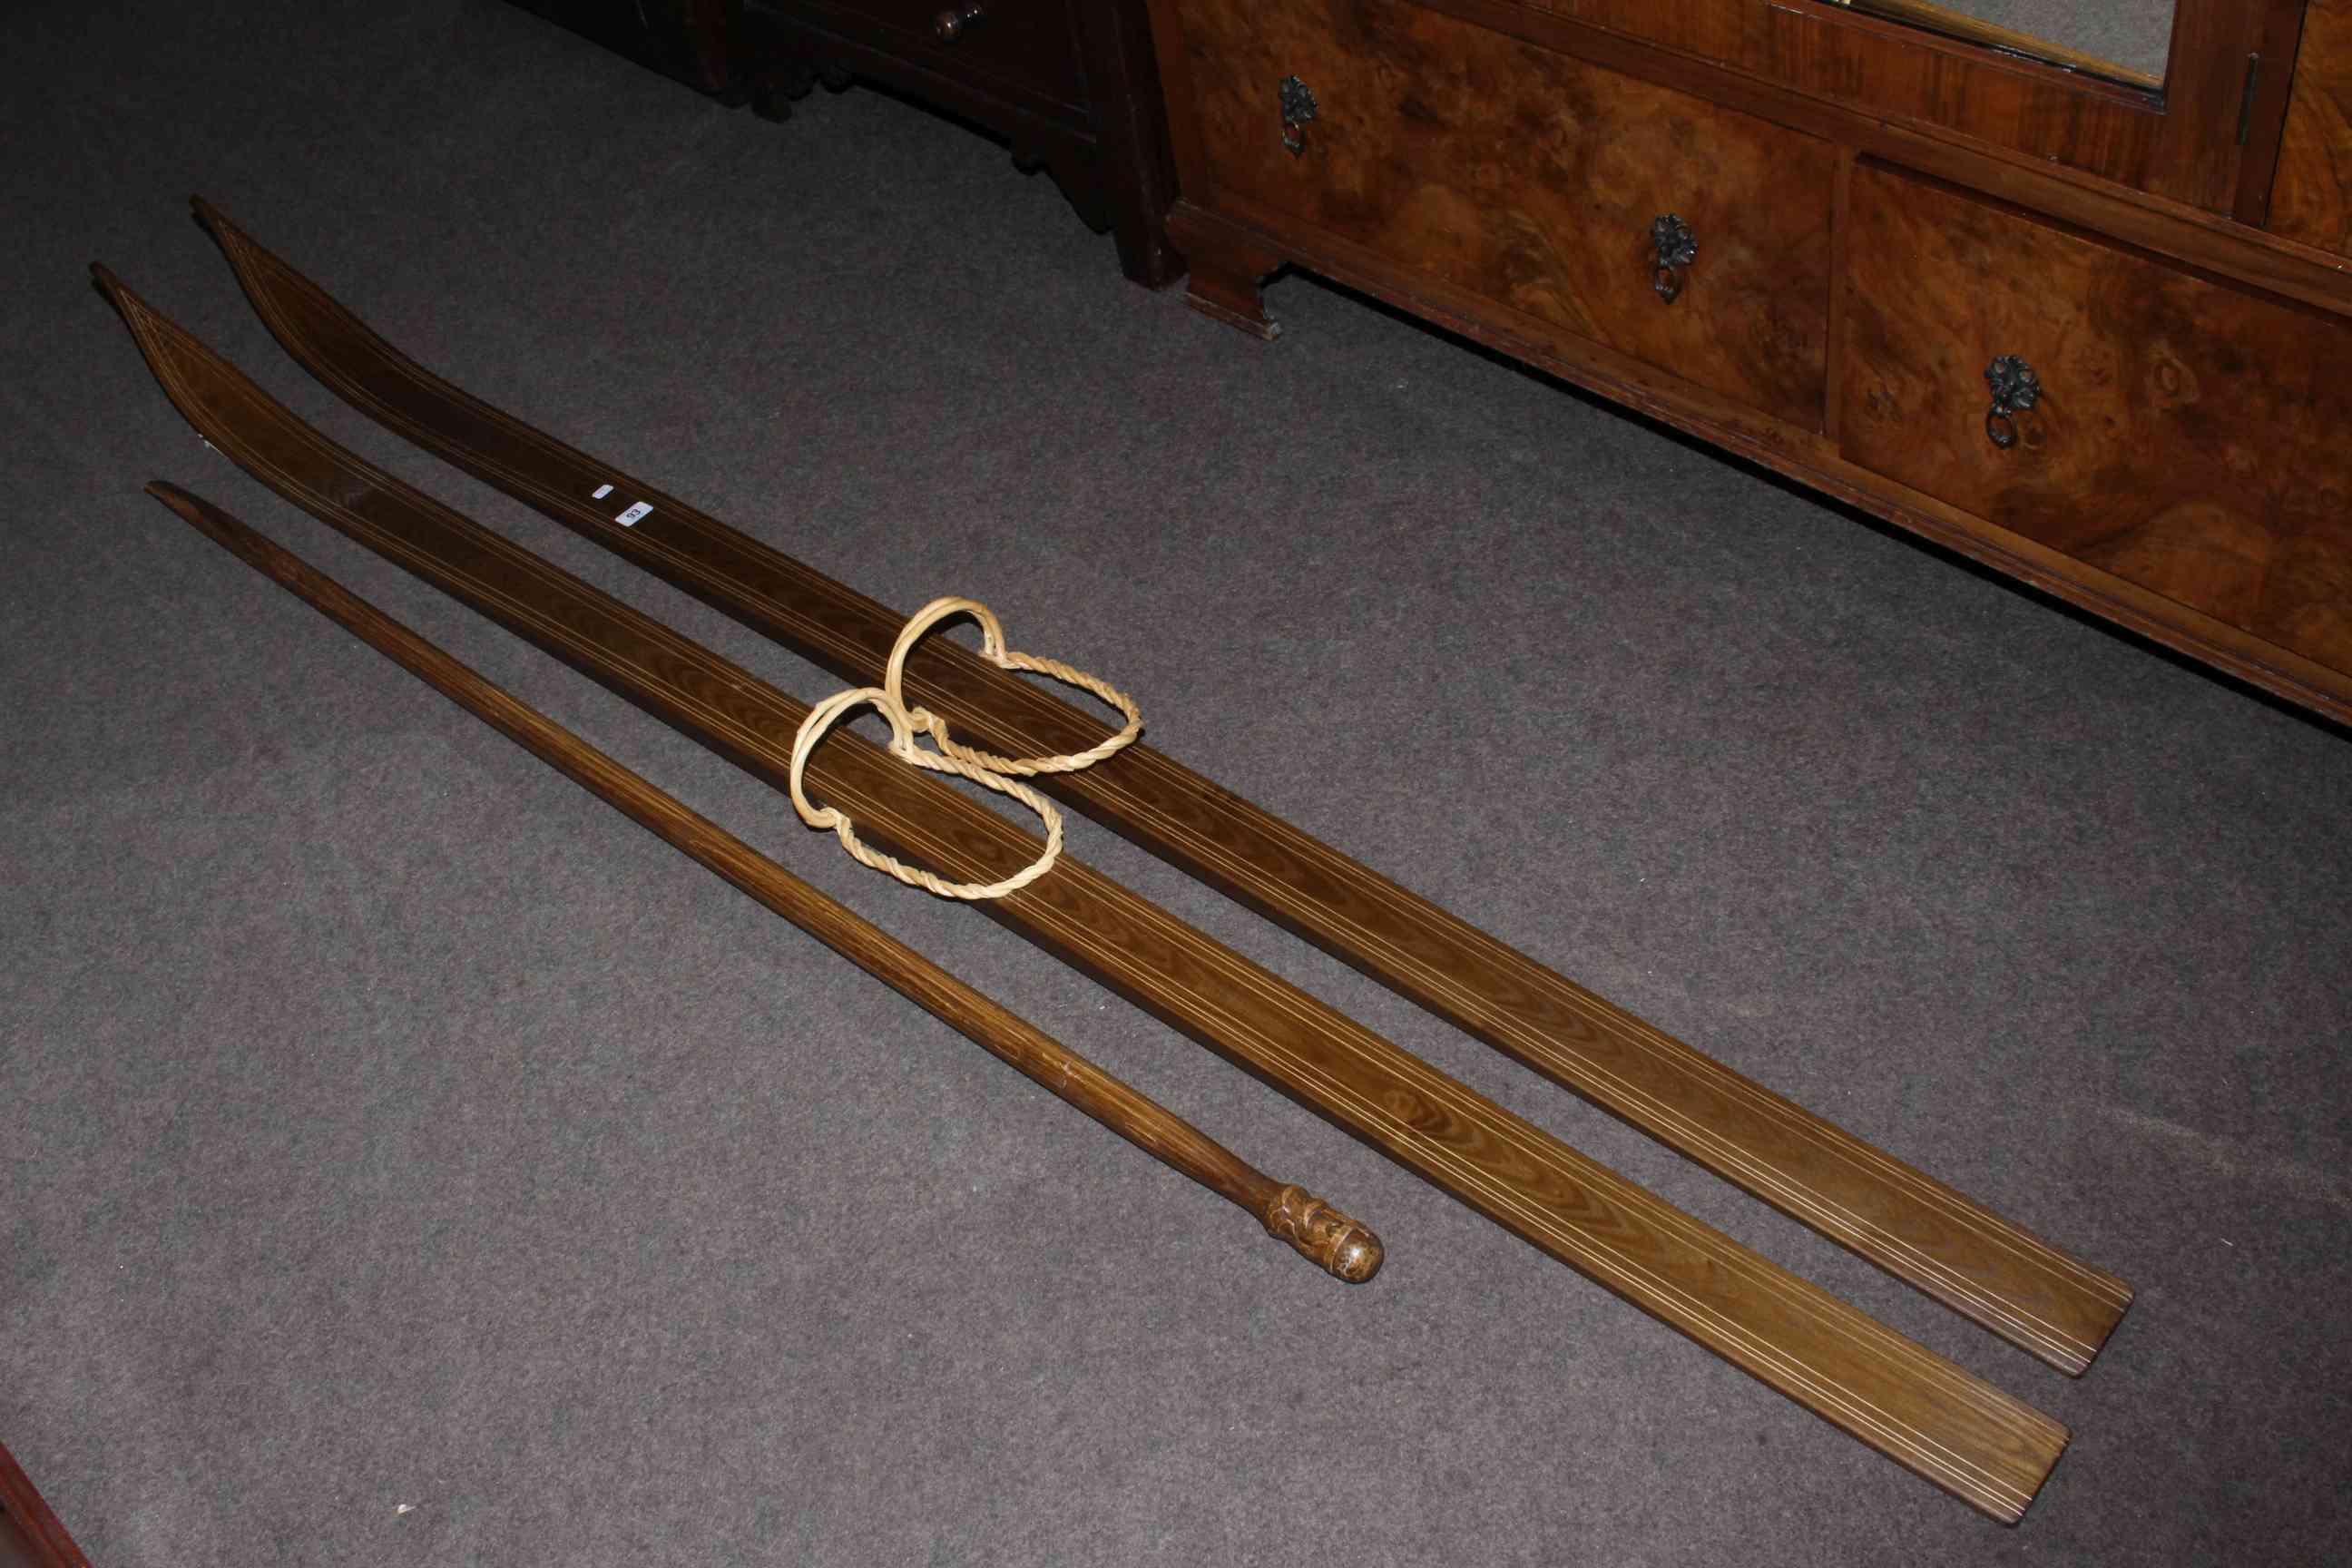 Pair of Aasmund Kleiv Norway Telemask ski's and pole and two gold clubs.